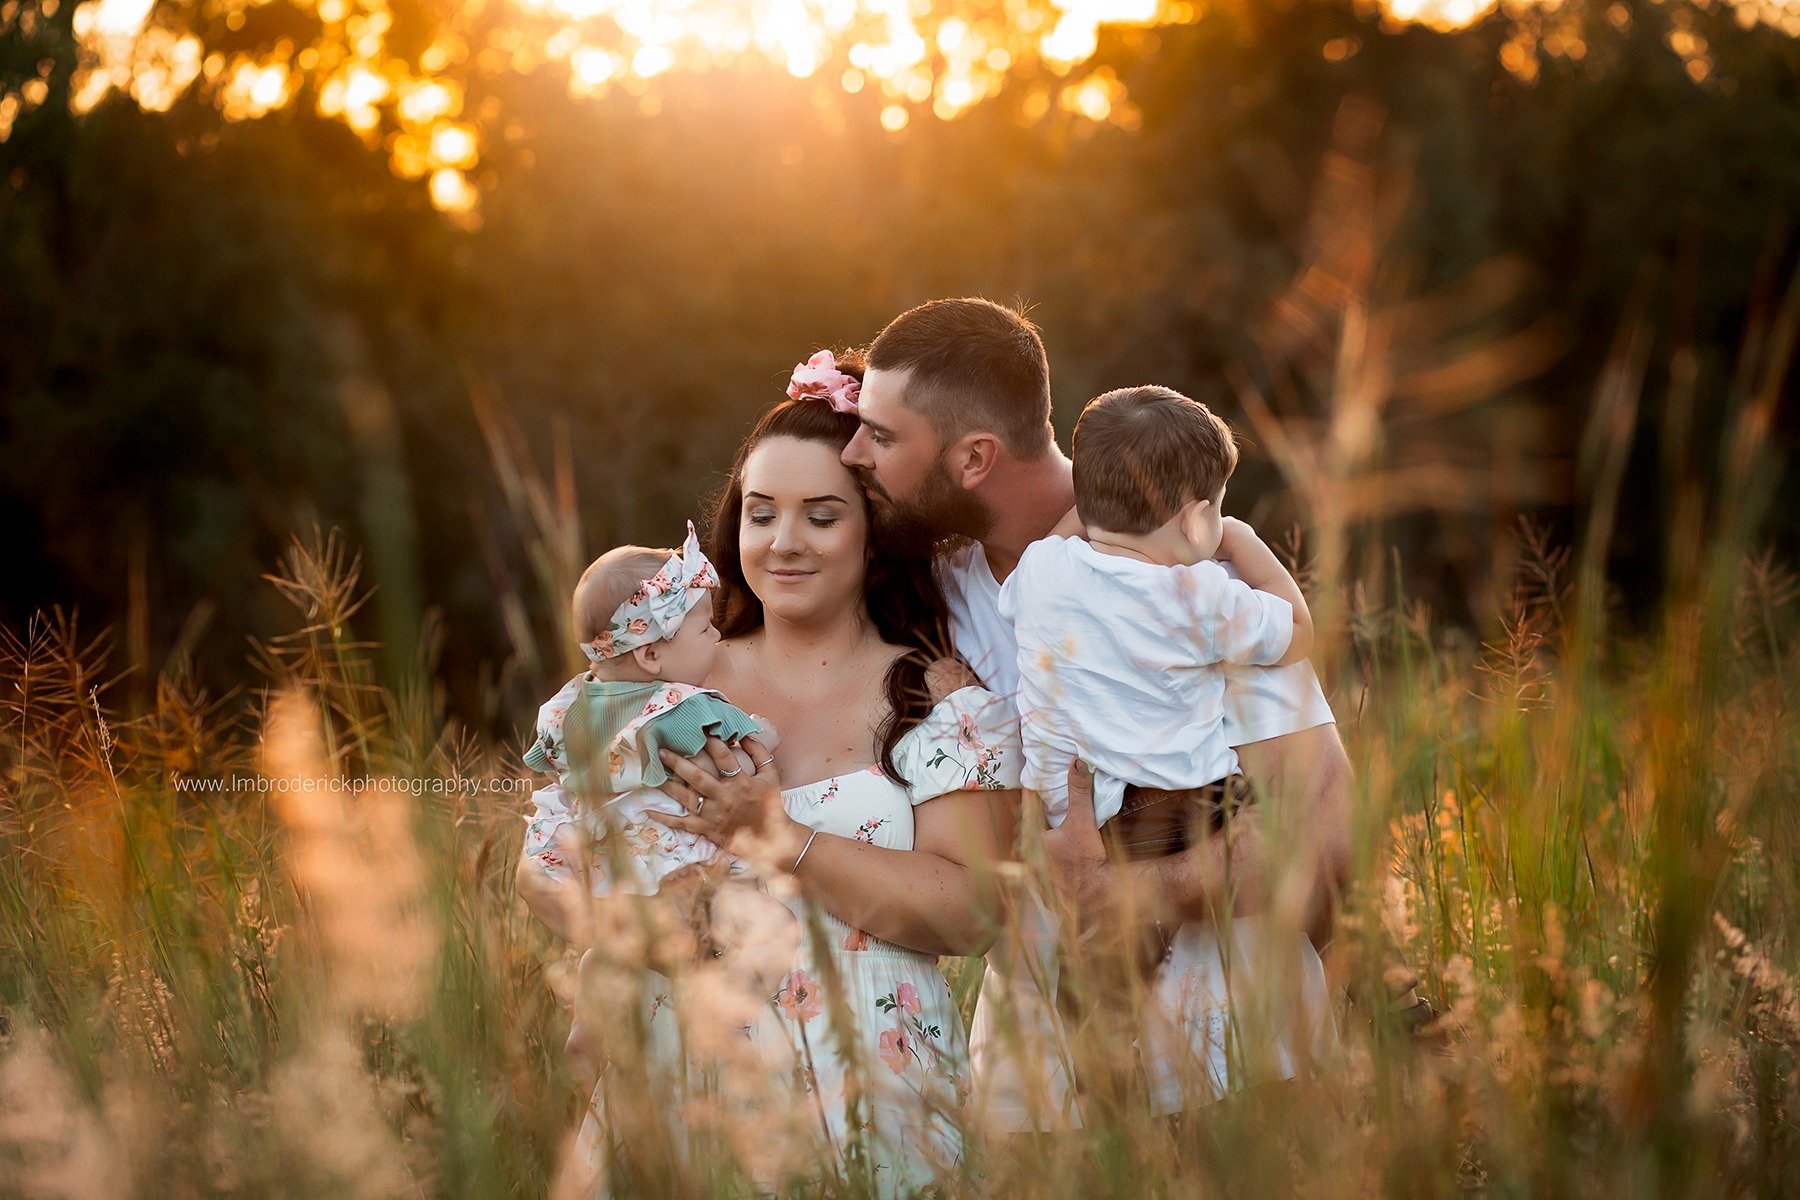 Completely in love with the dreamy golden light in these family portraits 😍

This was Michaela, James and their two adorable kiddos first family photos together. I think they nailed it :) They were spolied for choice when it came to choosing their f